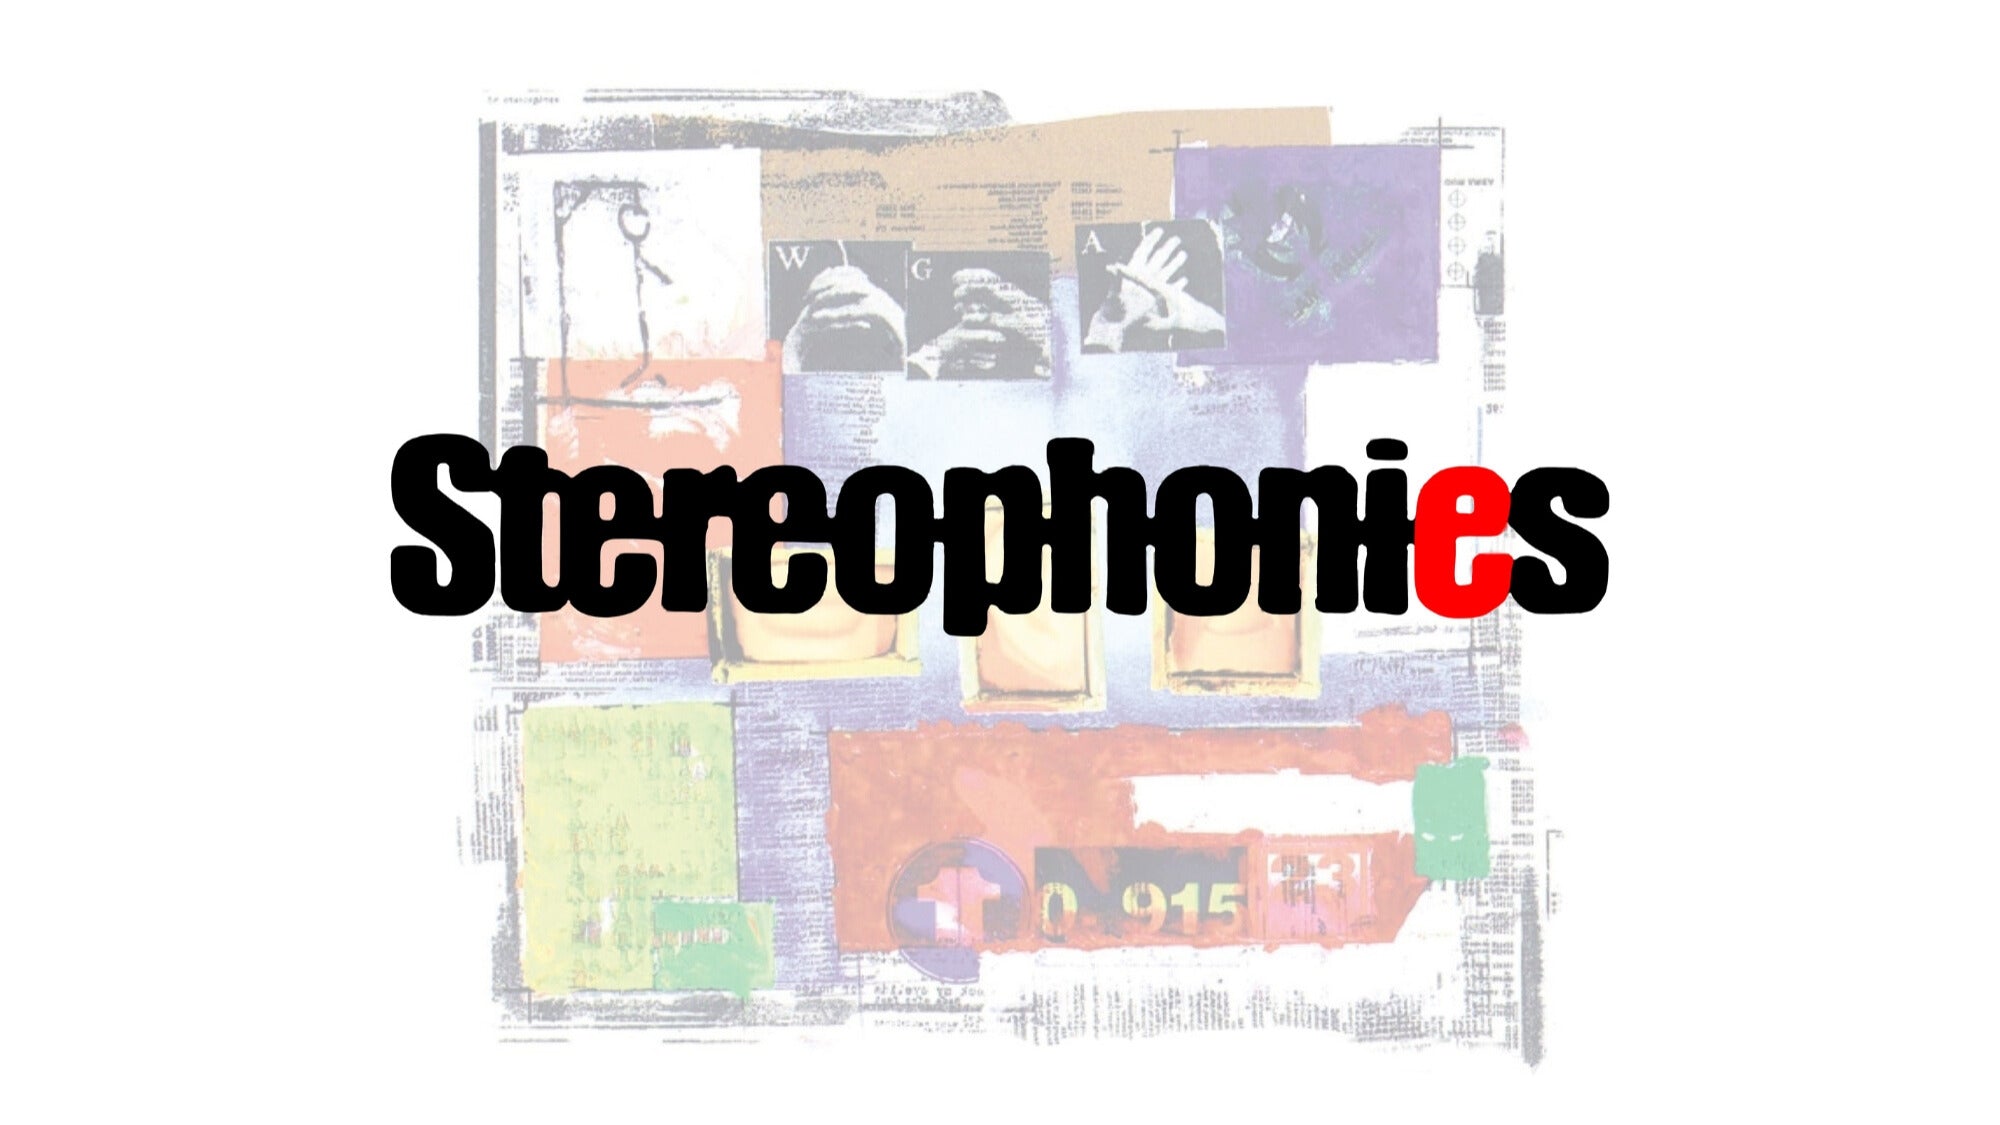 Stereophonies Tribute Live Music at The Attic Southampton